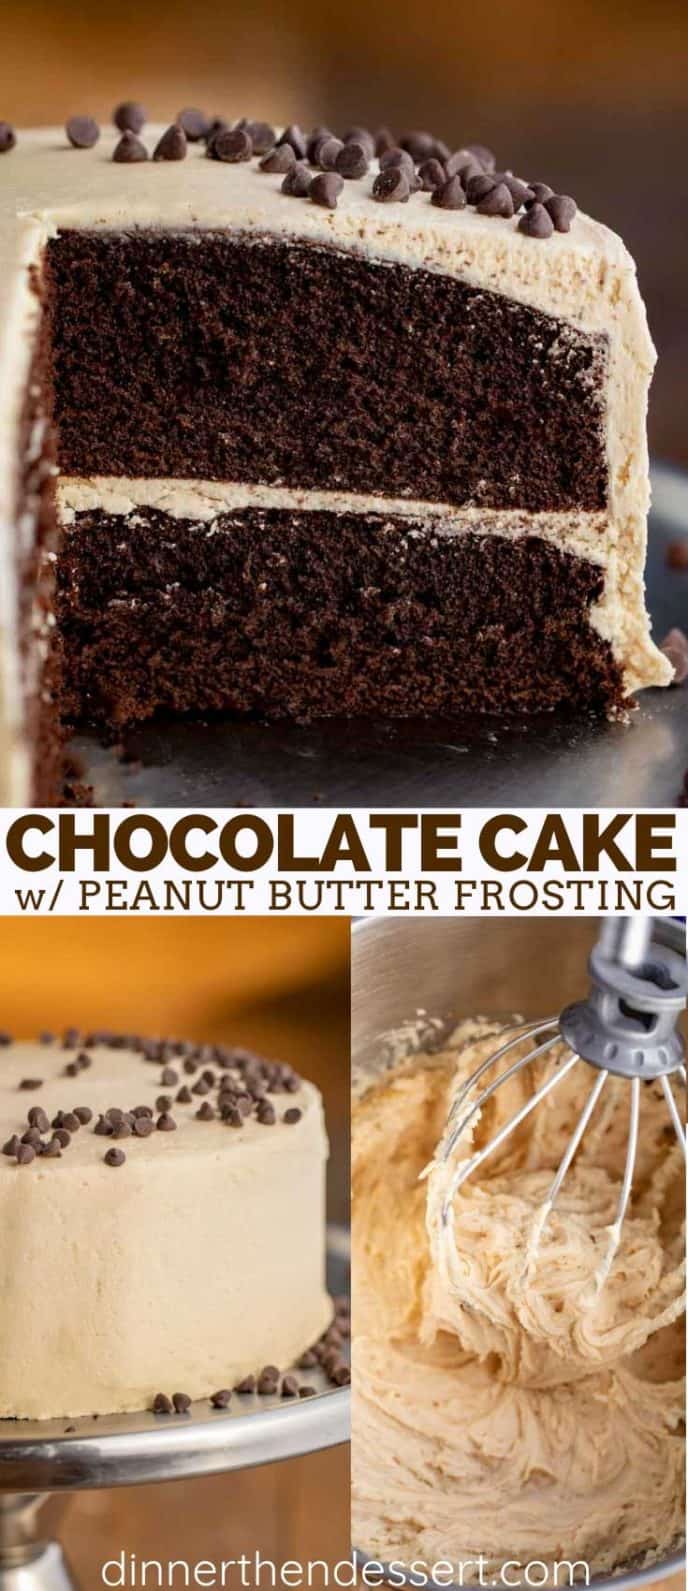 Cake with Chocolate and Peanut Butter